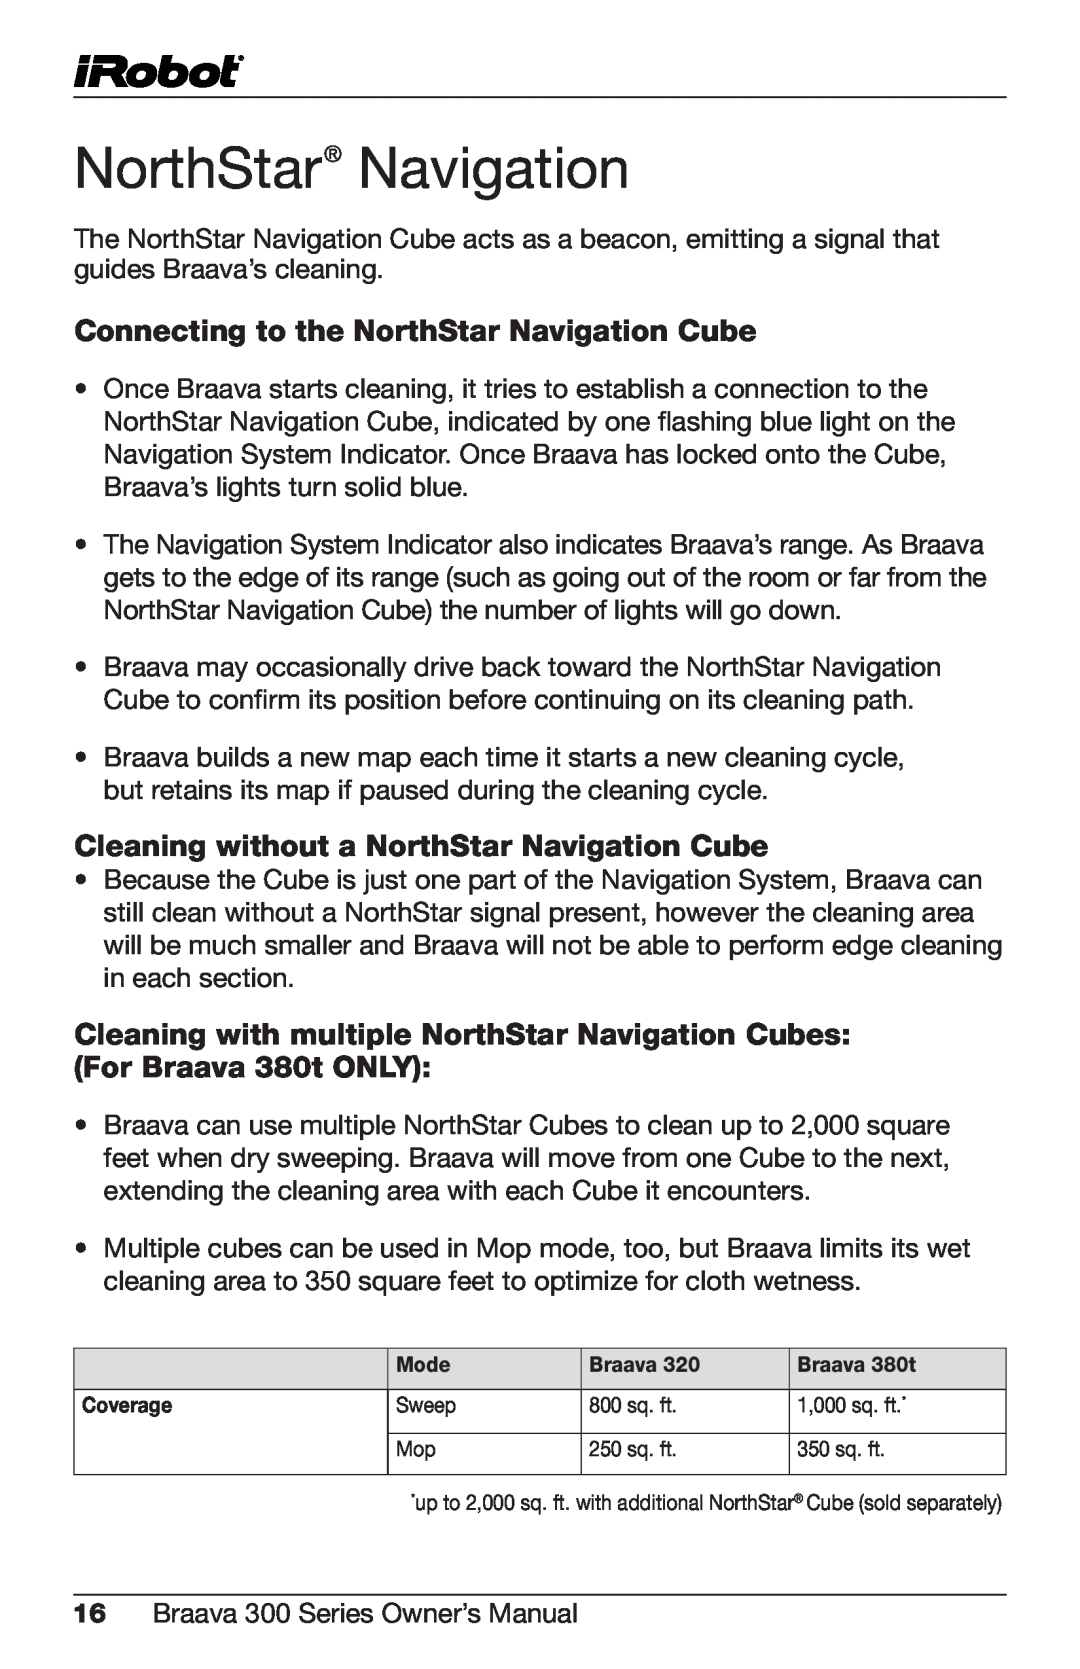 iRobot 320, 380t owner manual Connecting to the NorthStar Navigation Cube, Cleaning without a NorthStar Navigation Cube 